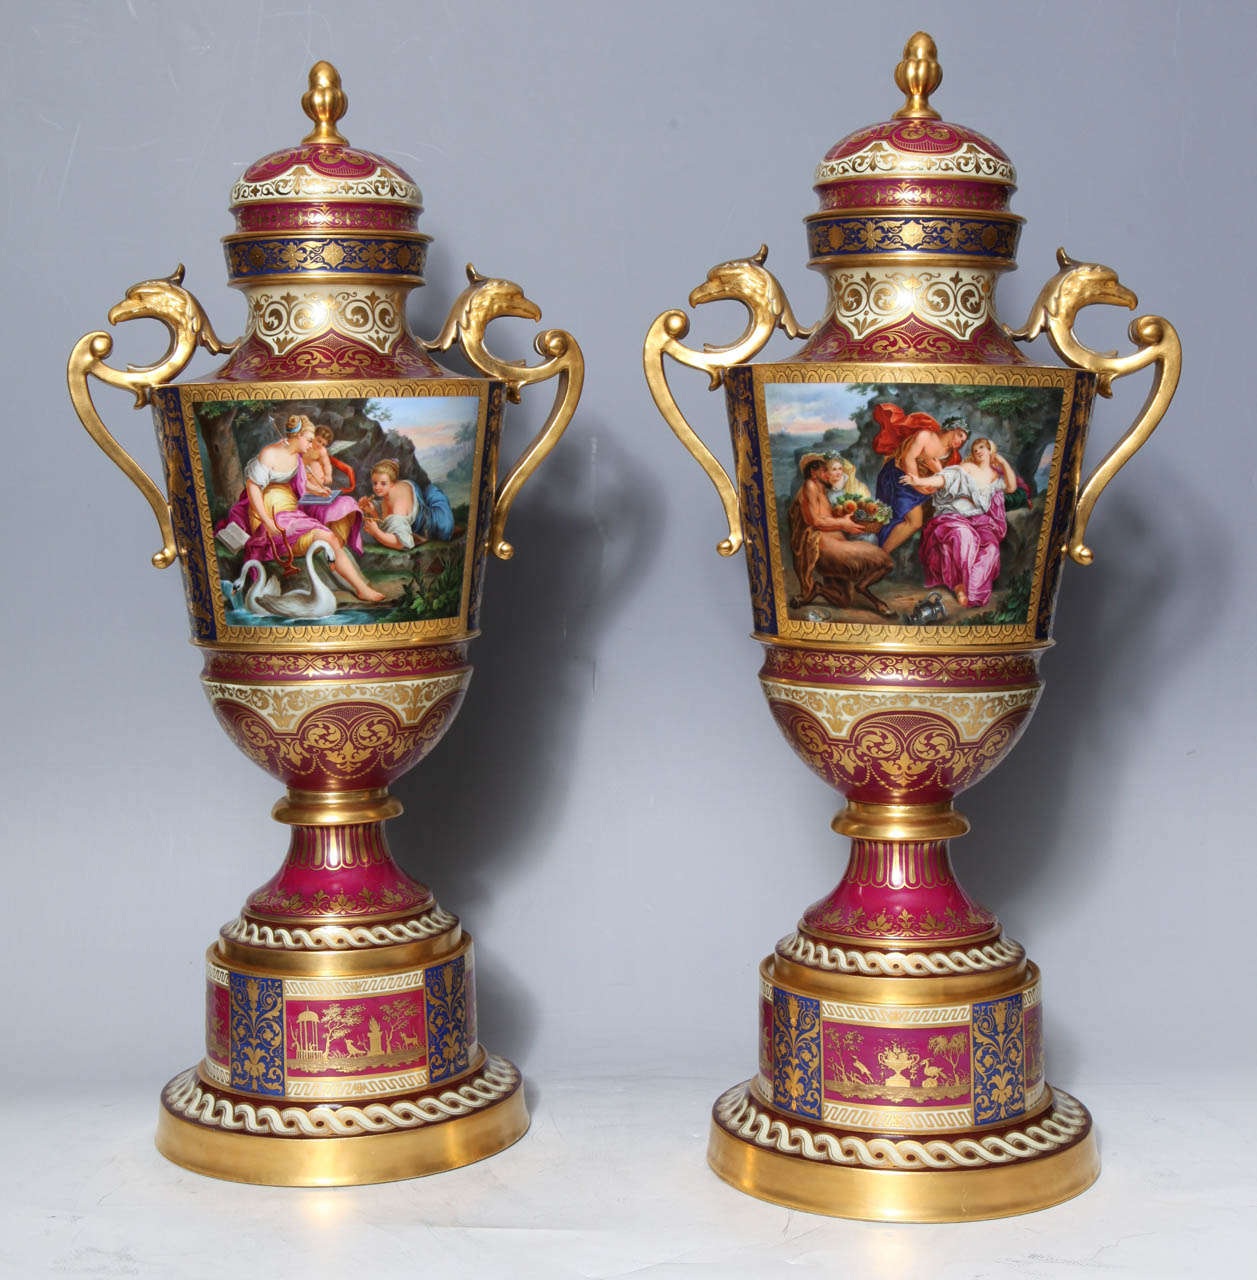 A magnificent pair of 19th century royal Vienna covered urns on original stands with double eagle handles depicting neoclassical lovers and cupid. These ornate urns show scenes populated by angelic cupids in beautifully deep landscapes surrounding